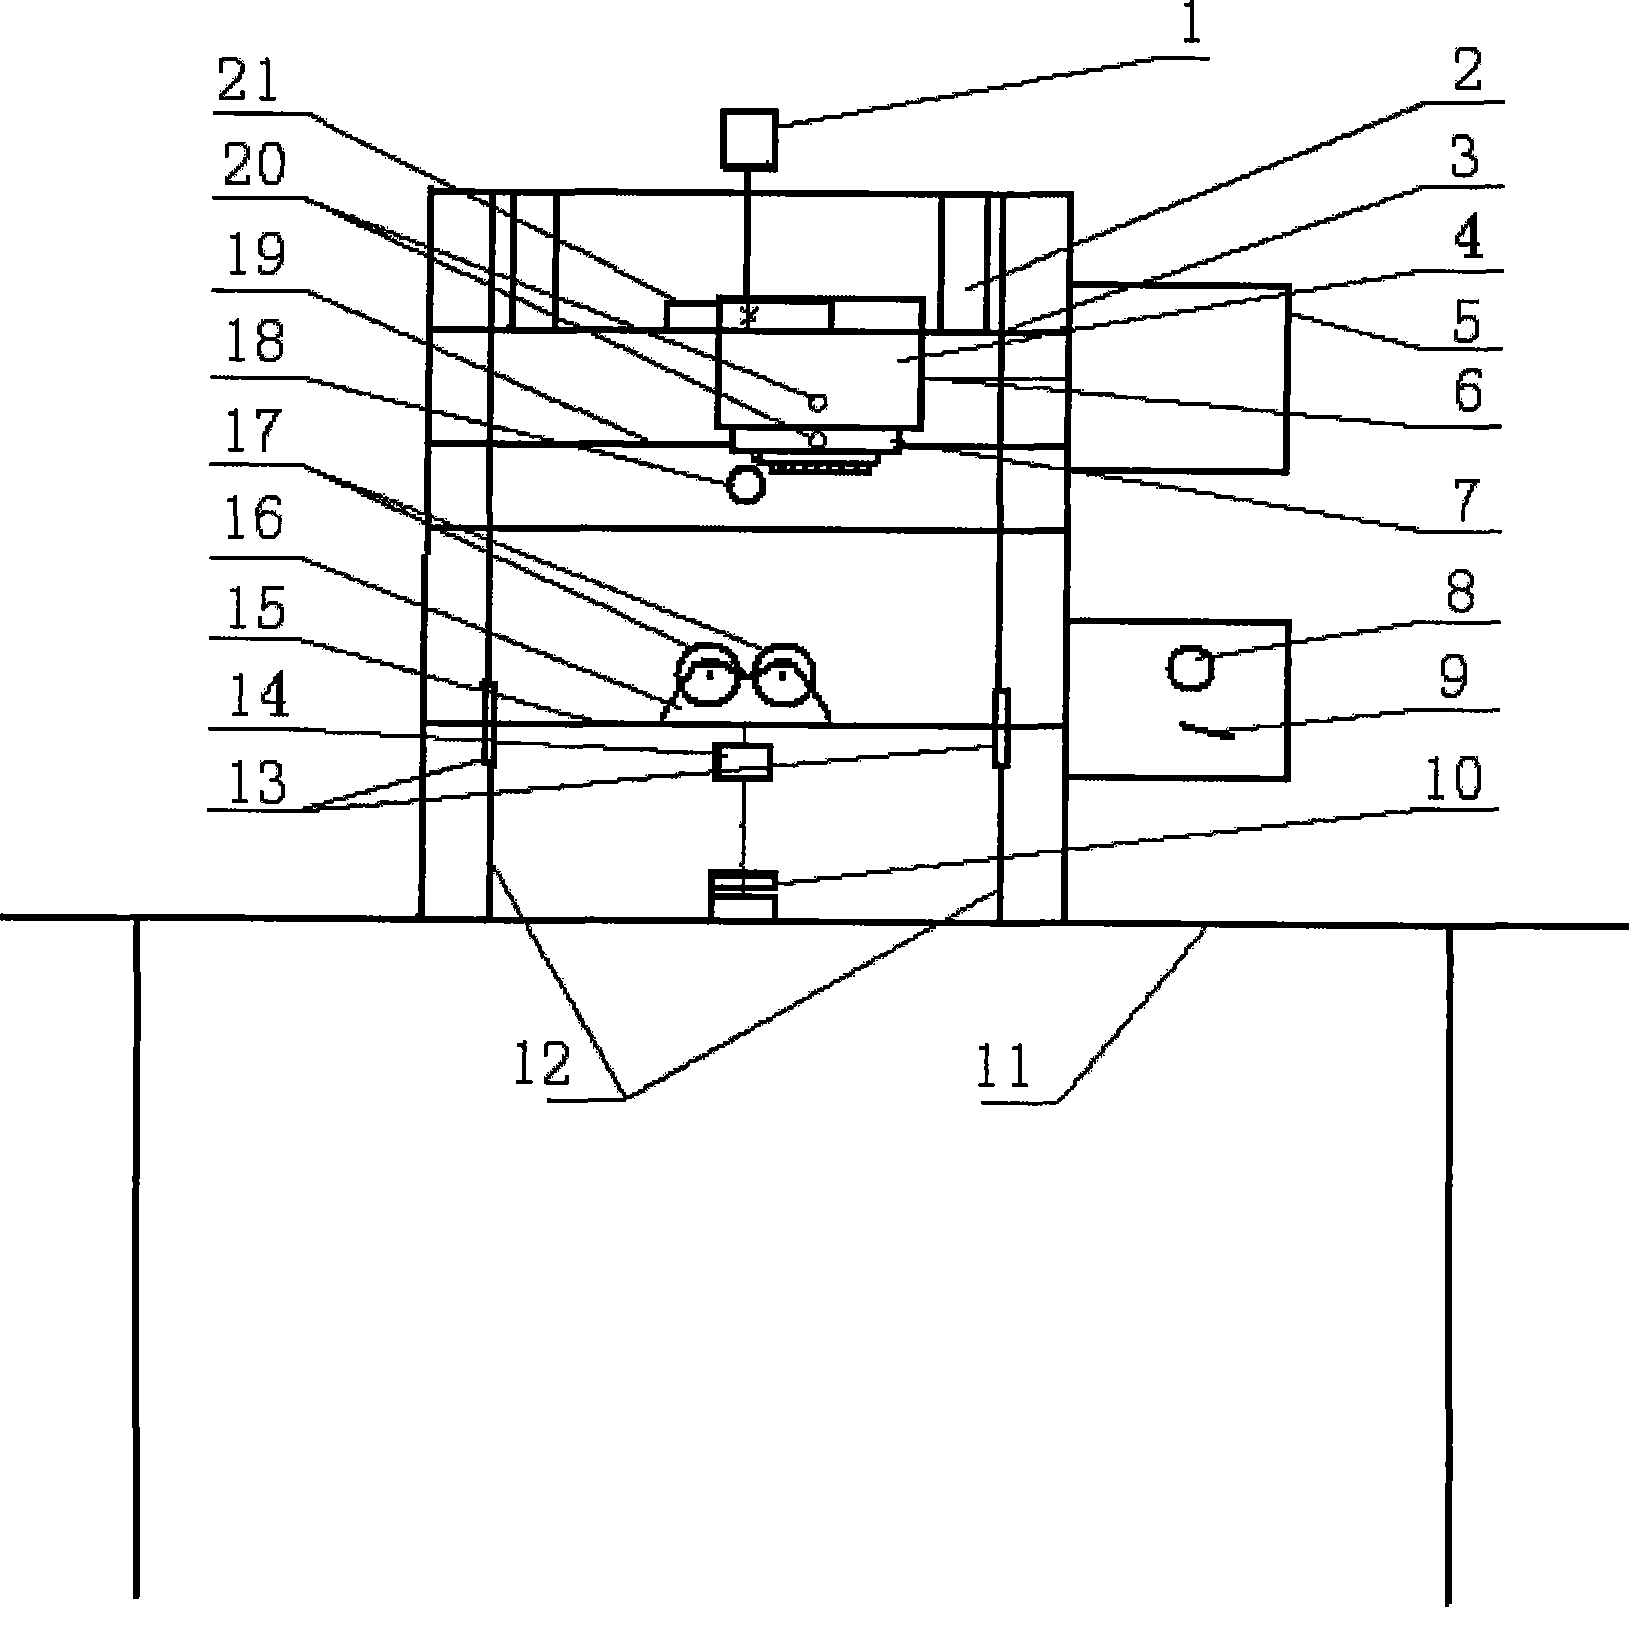 Fixture for forming characters or designs on surface of circular column workpiece